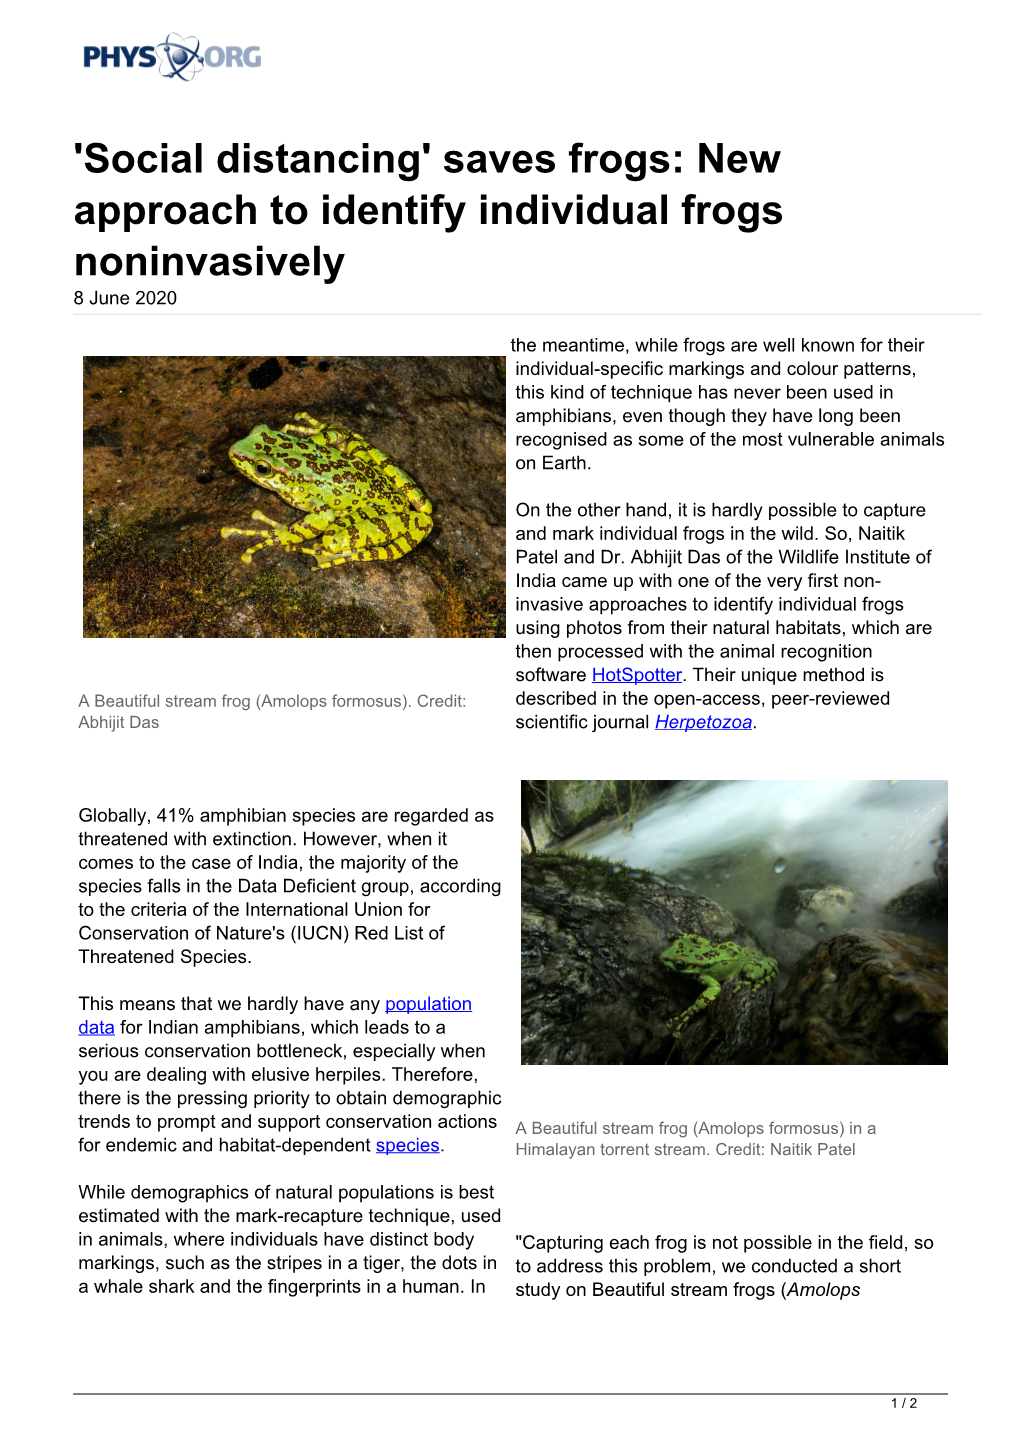 'Social Distancing' Saves Frogs: New Approach to Identify Individual Frogs Noninvasively 8 June 2020